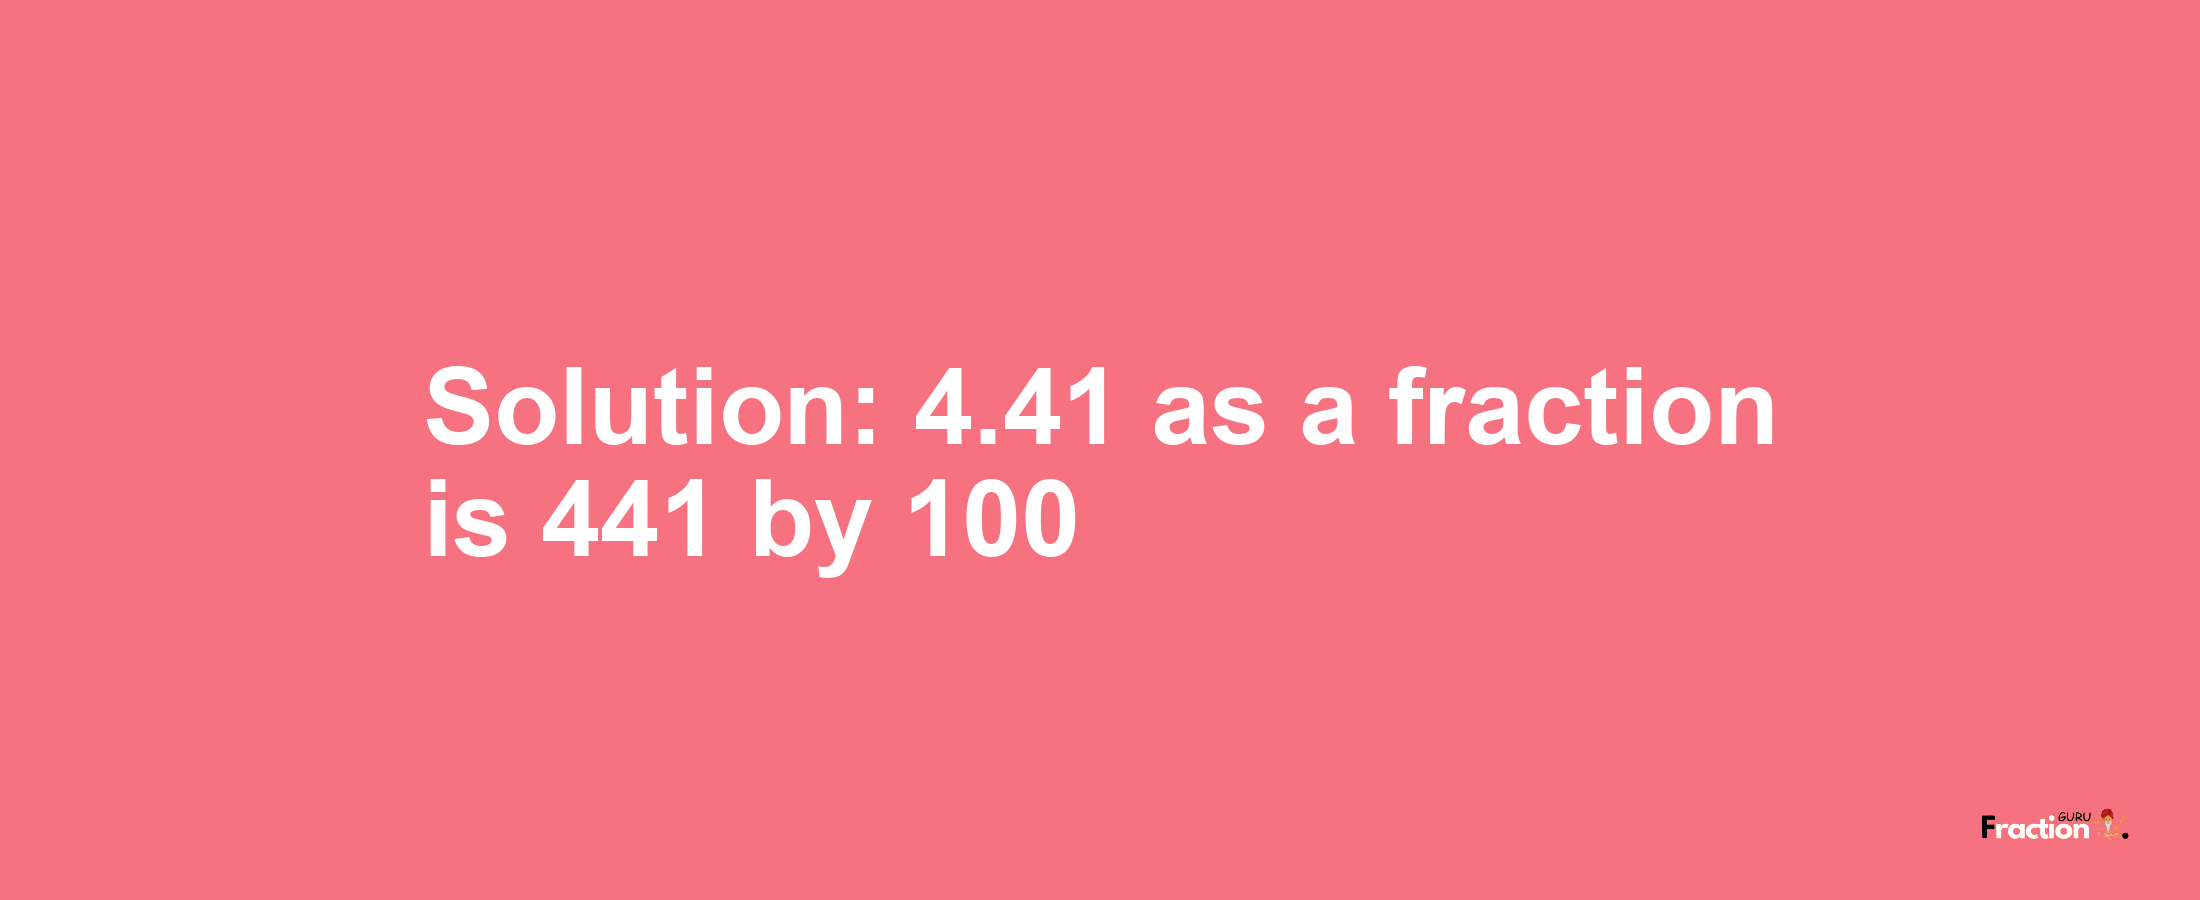 Solution:4.41 as a fraction is 441/100